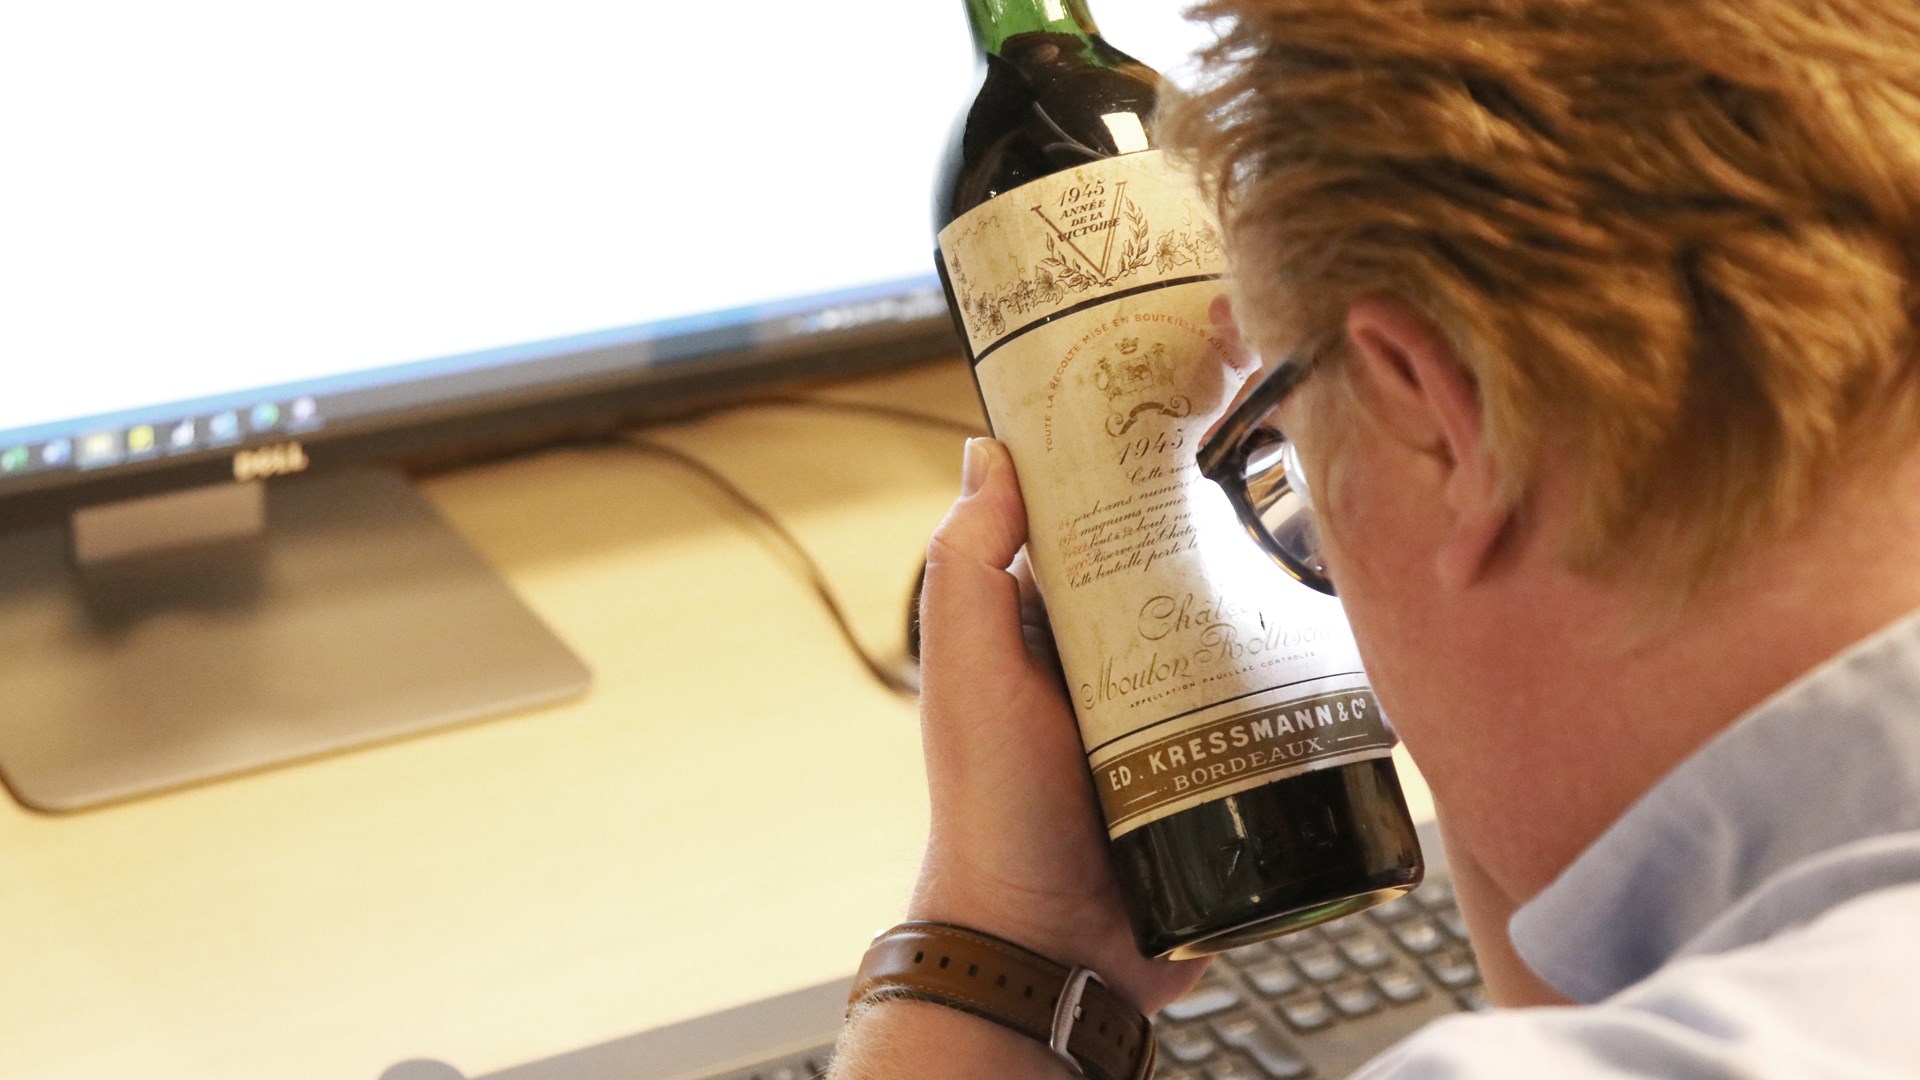 Anti-Fraud department confirming the Mouton-Rothschild 1945